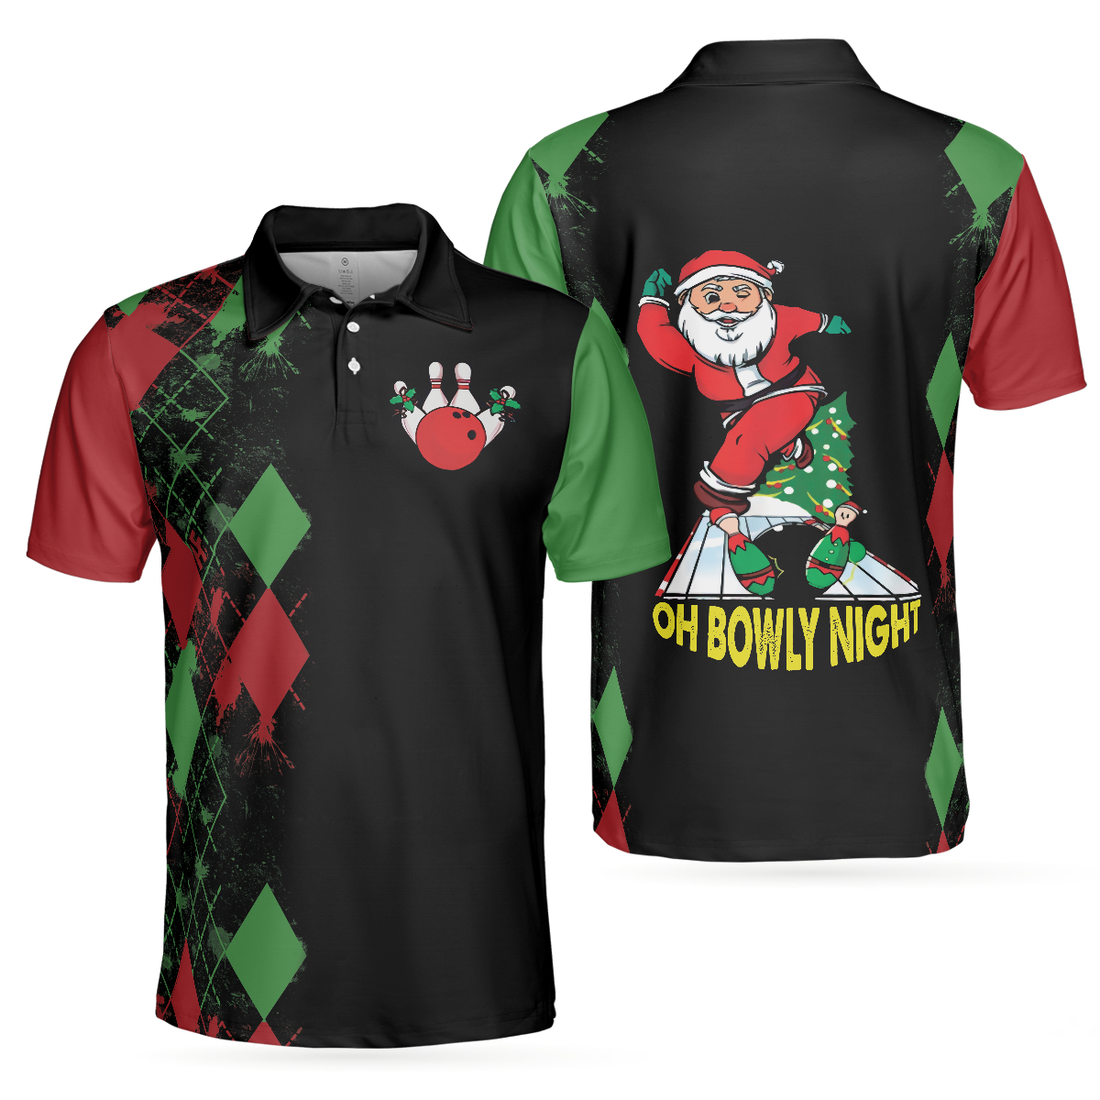 Bowly Night Polo Shirt Christmas Themed Polo Shirt Design Best Christmas Gift Idea For Bowling Lovers - 1